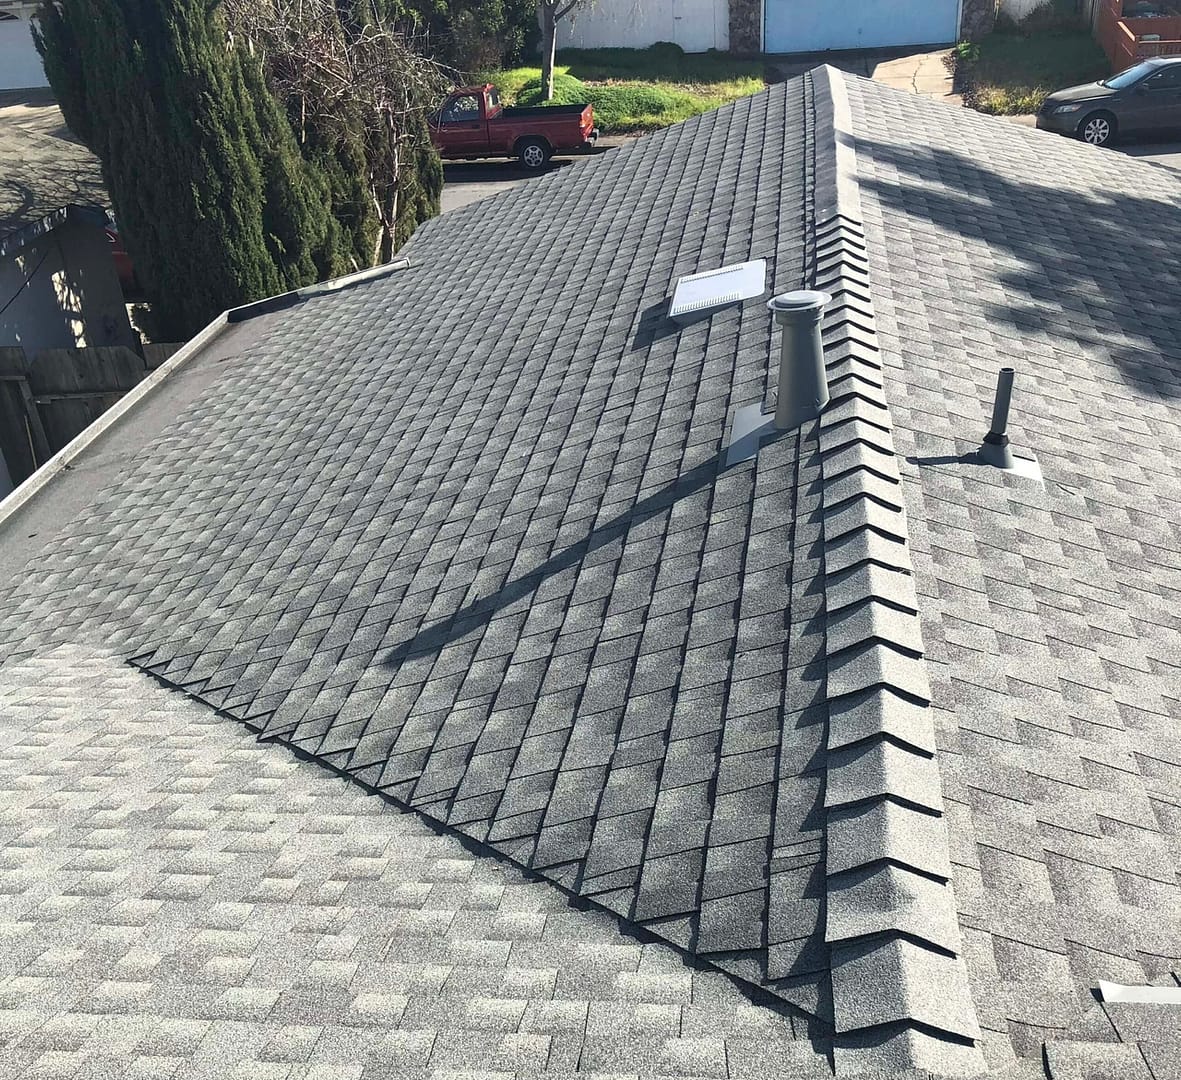 Roofing company completed roofing installation project in Bethesda, Maryland